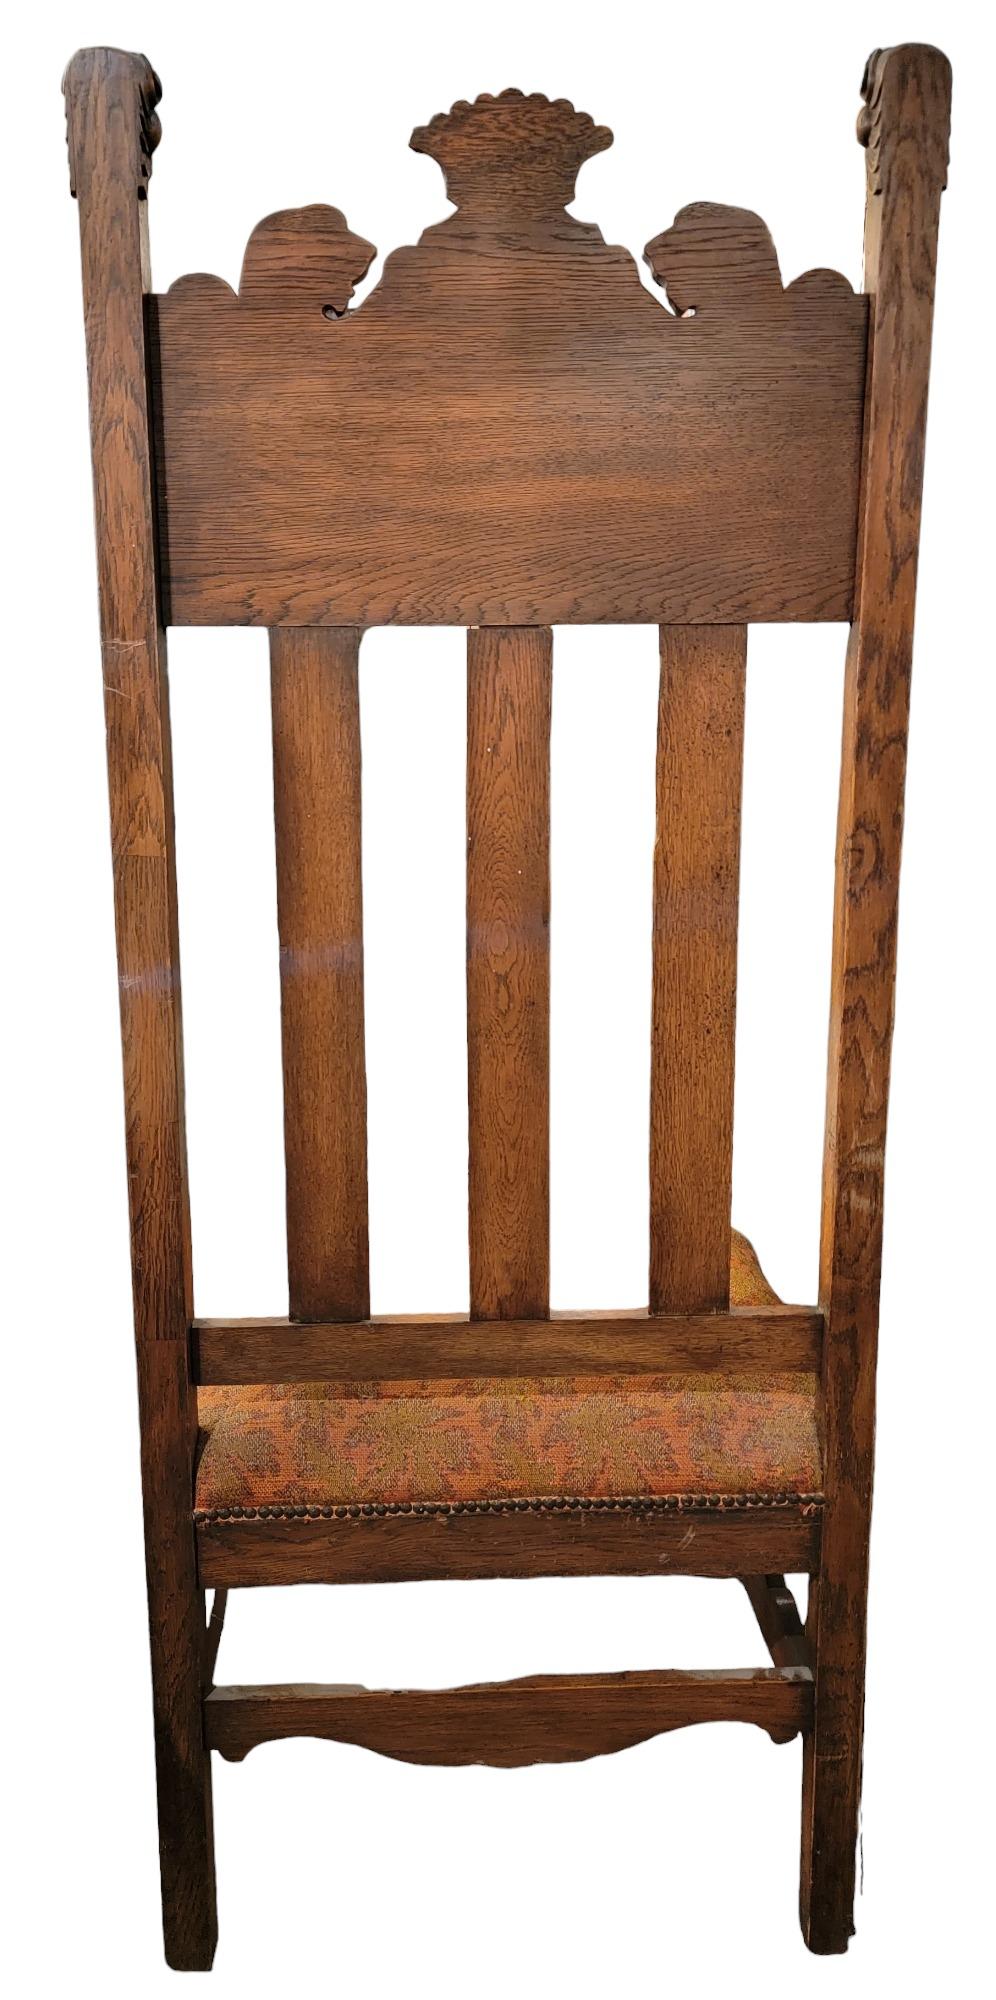 19thc English Hand Carved Wooden Kings Chair In Good Condition For Sale In Pasadena, CA